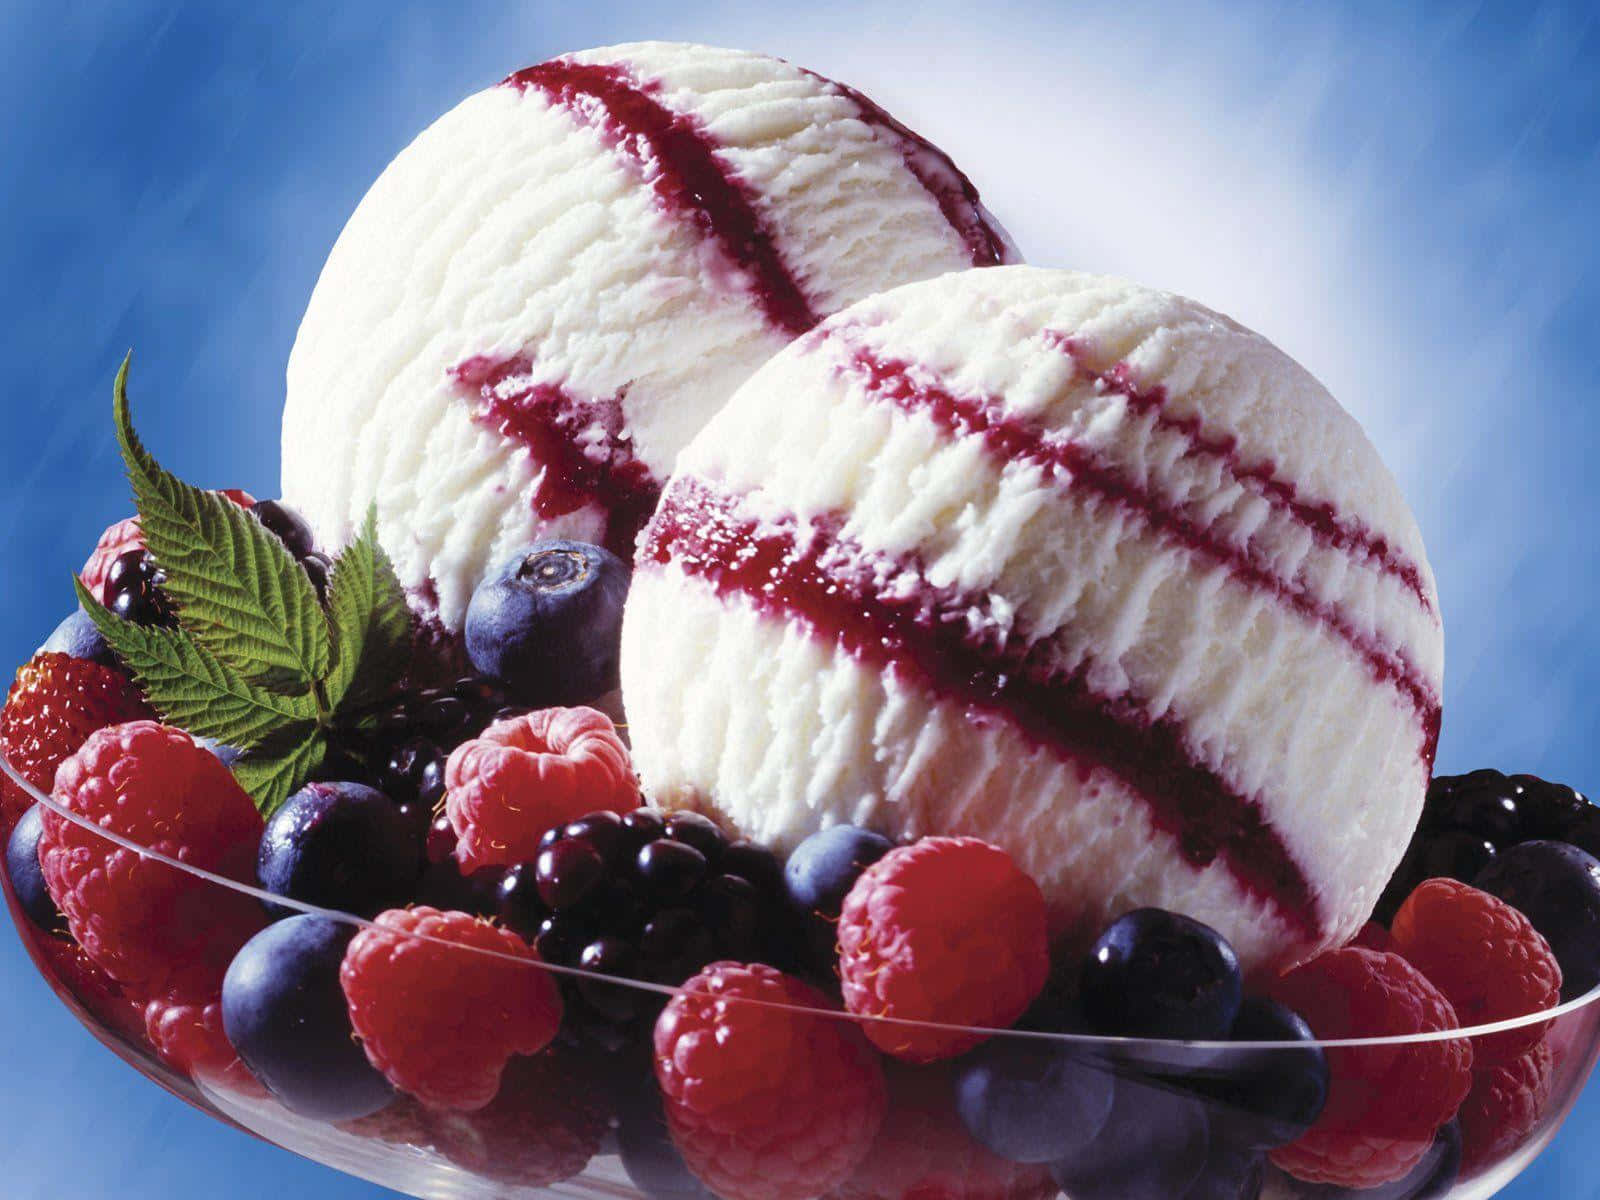 Dive into a world of bliss with this heavenly ice cream!